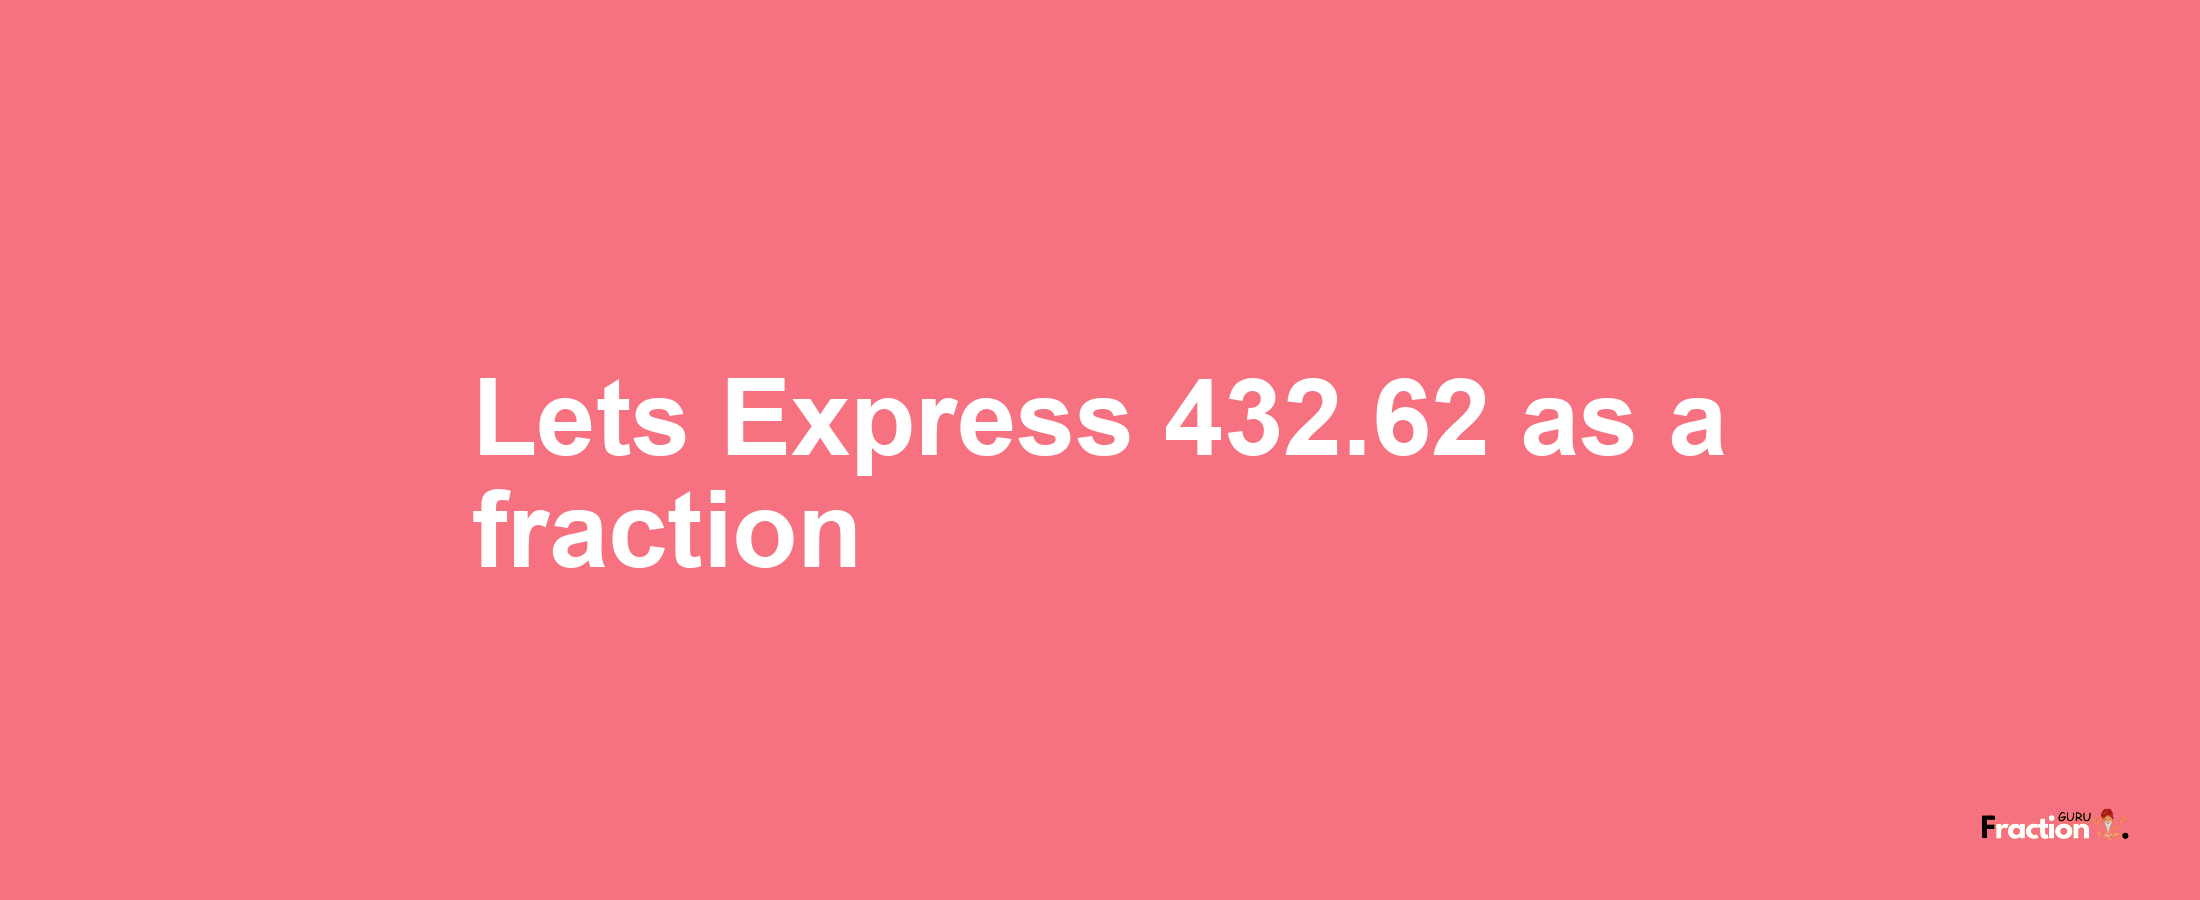 Lets Express 432.62 as afraction